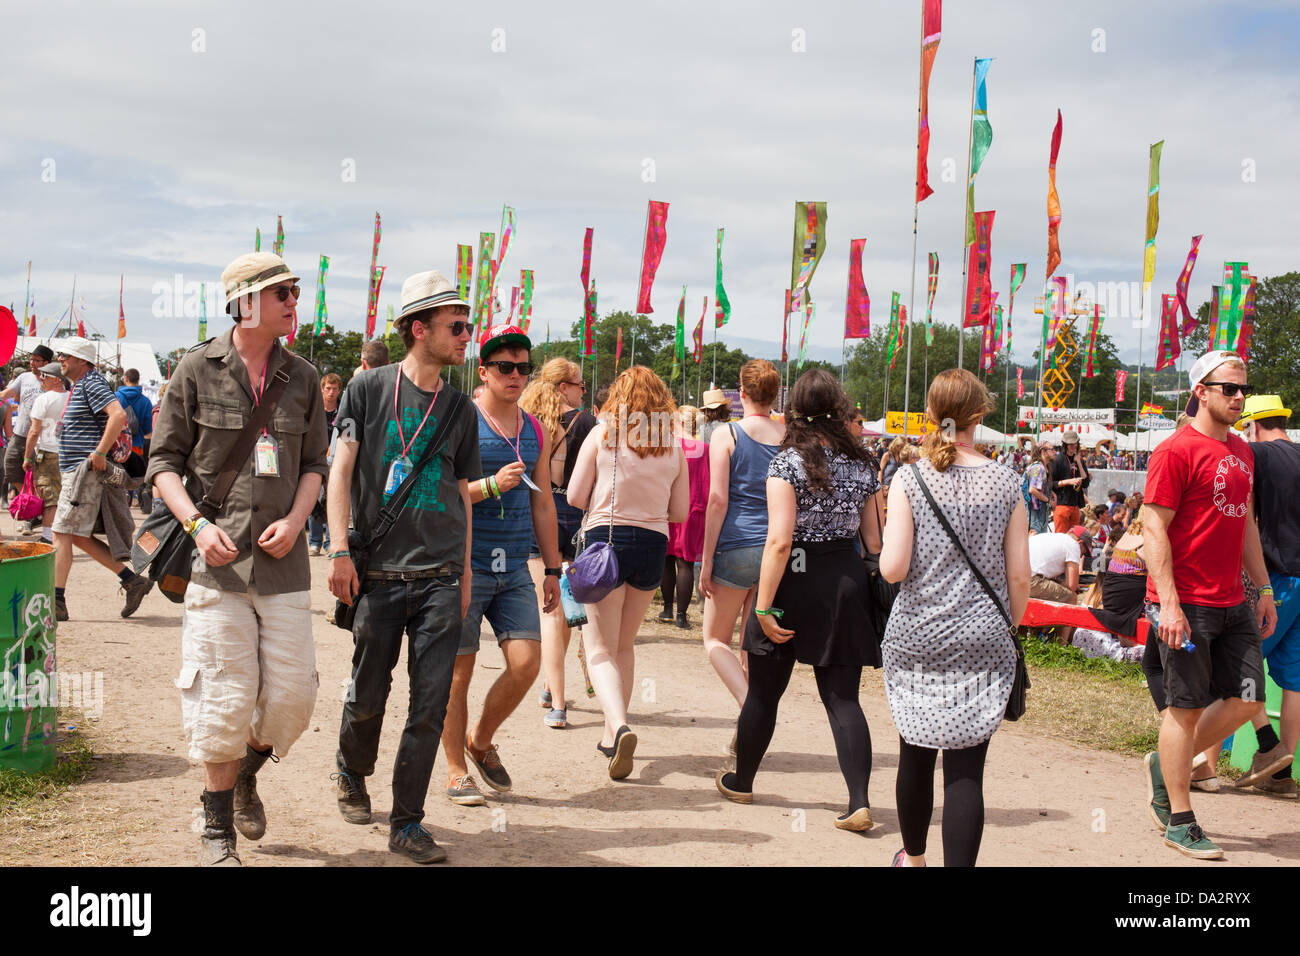 GLASTONBURY FESTIVAL, UNITED KINGDOM - JUNE 30 2013 : General view of people walking through the West Holts area Stock Photo